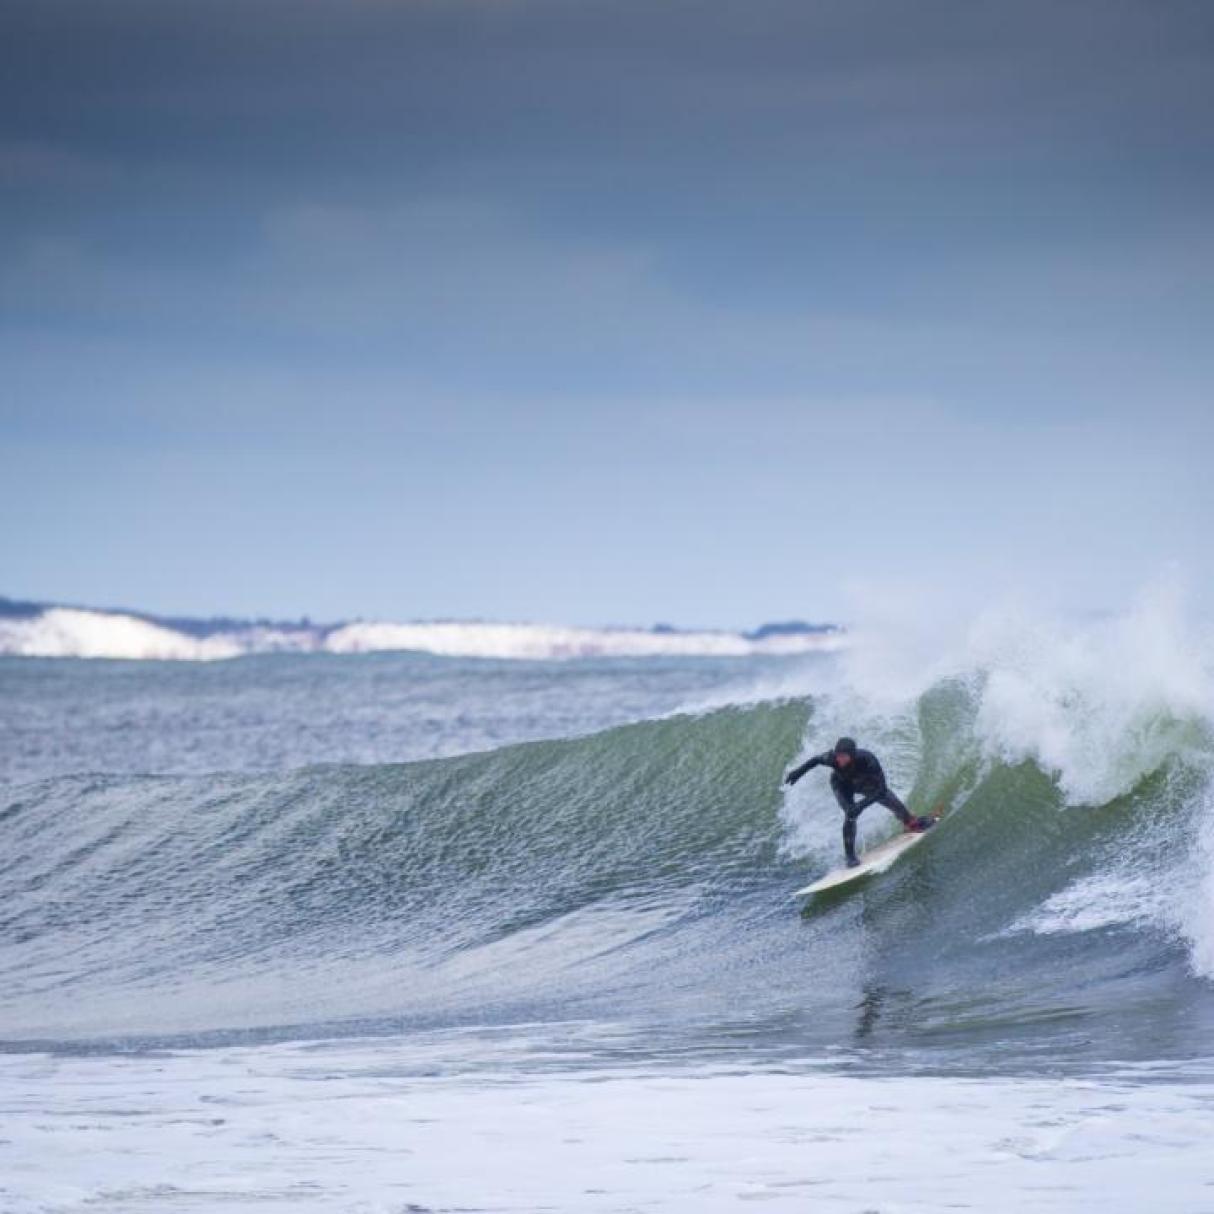 A surfer catches a wave at Lawrencetown beach in Nova Scotia